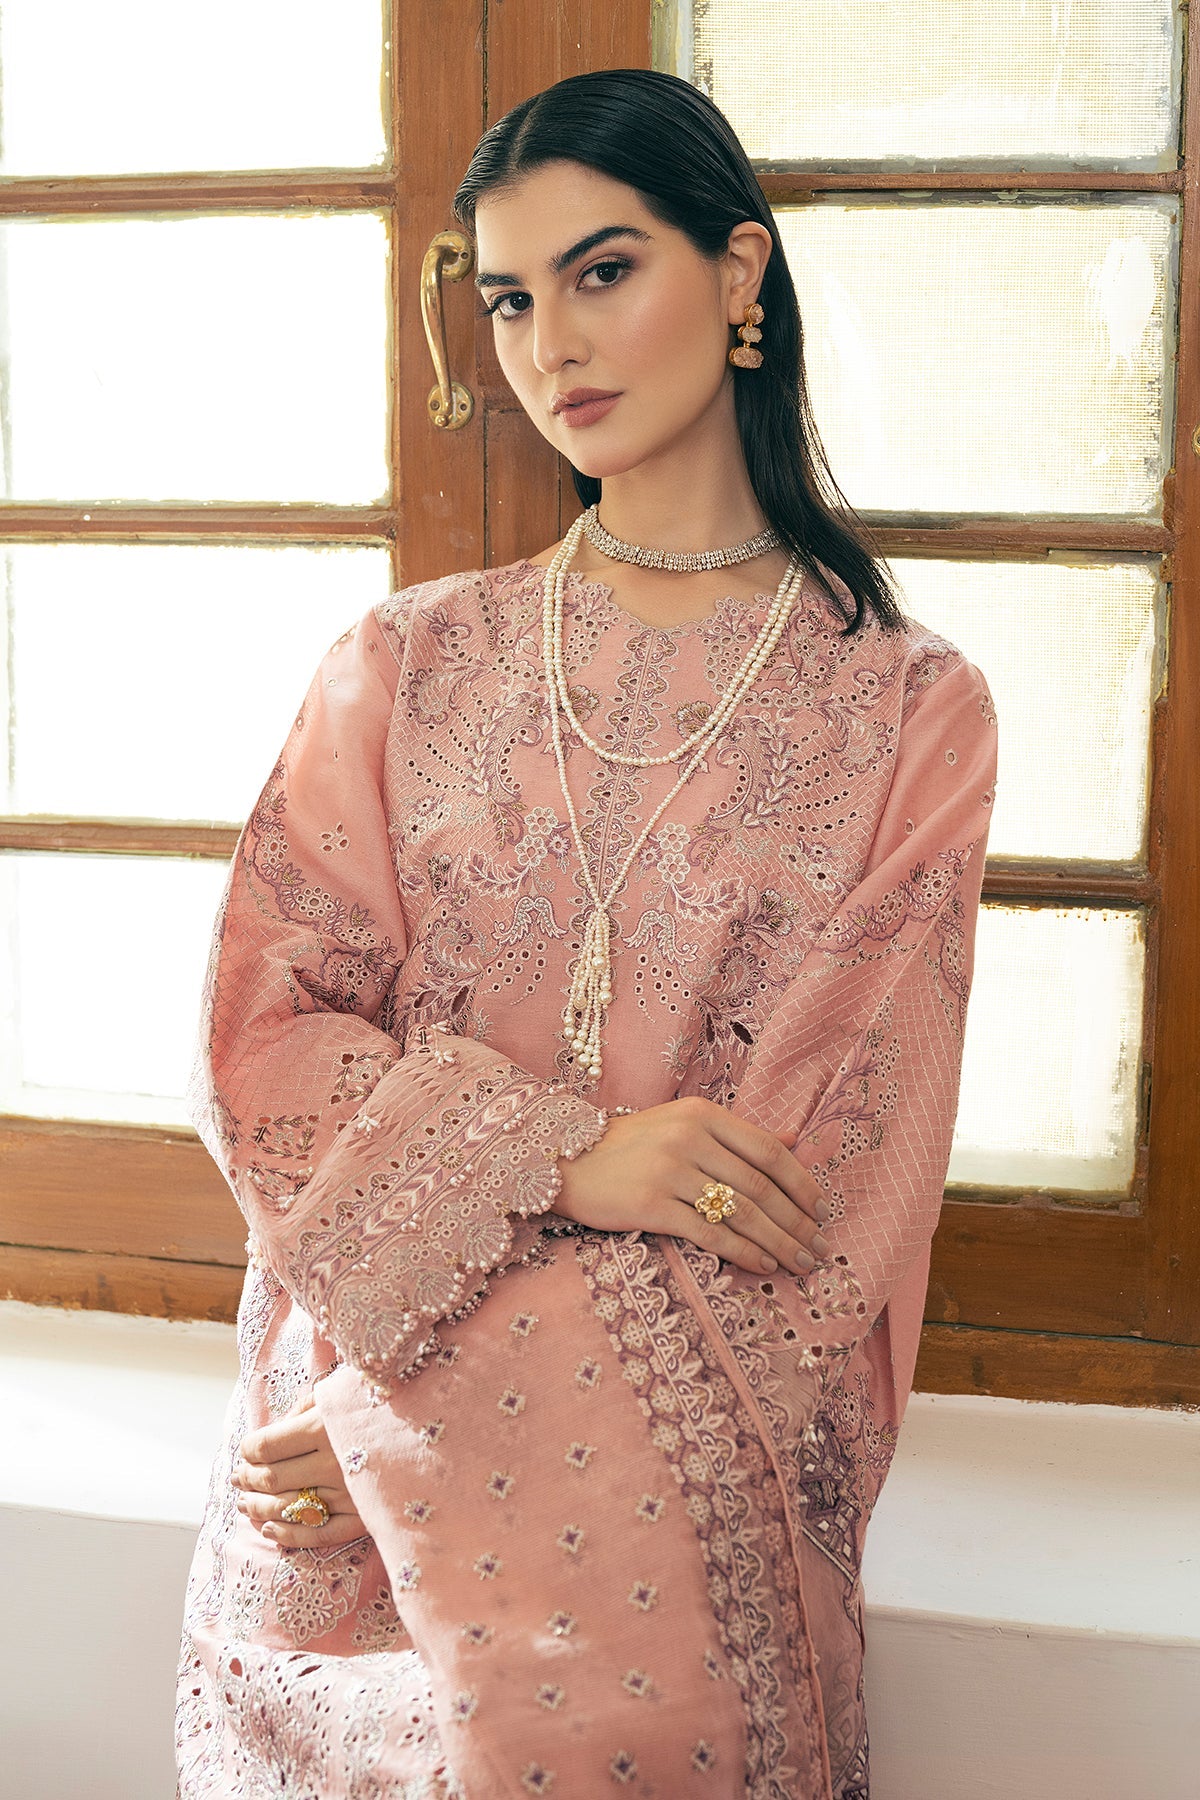 Shop Now, D-08 - Embroidered Swiss Lawn 2023 - Baroque - Shahana Collection UK - Wedding and Bridal Party Dresses 